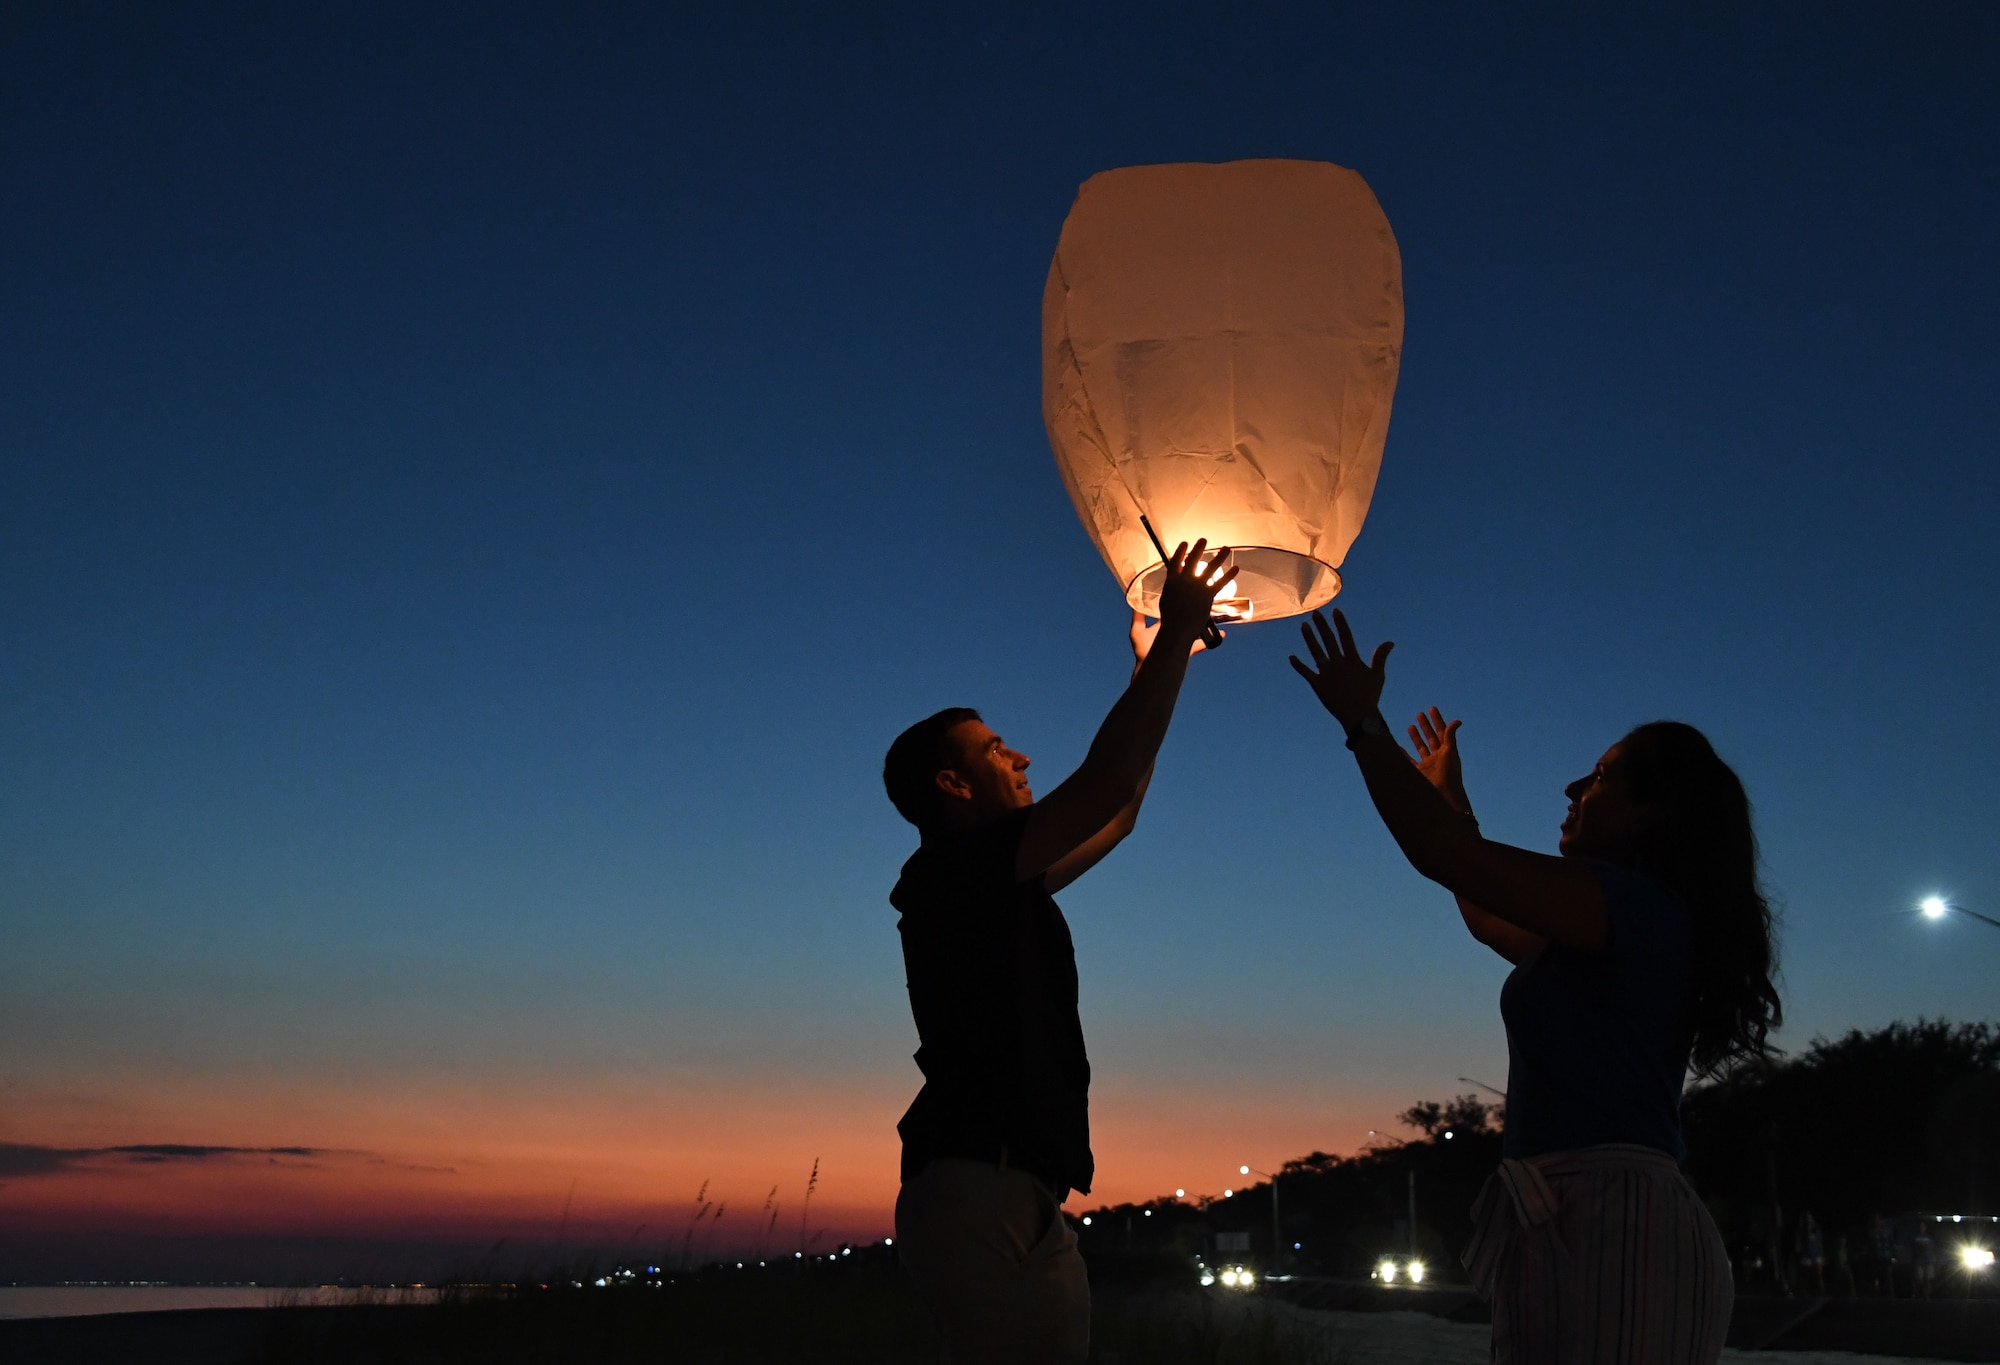 U.S. Air Force Col. Jason Allen, 81st Training Wing vice commander, and his wife, Mayra, release a lantern during the Gold Star Families Sky Lantern Release on the Biloxi Beach, Mississippi, Sept. 23, 2022. The event, hosted by Keesler Air Force Base, included eco-friendly sky lanterns released in honor of fallen heroes. (U.S. Air Force photo by Kemberly Groue)